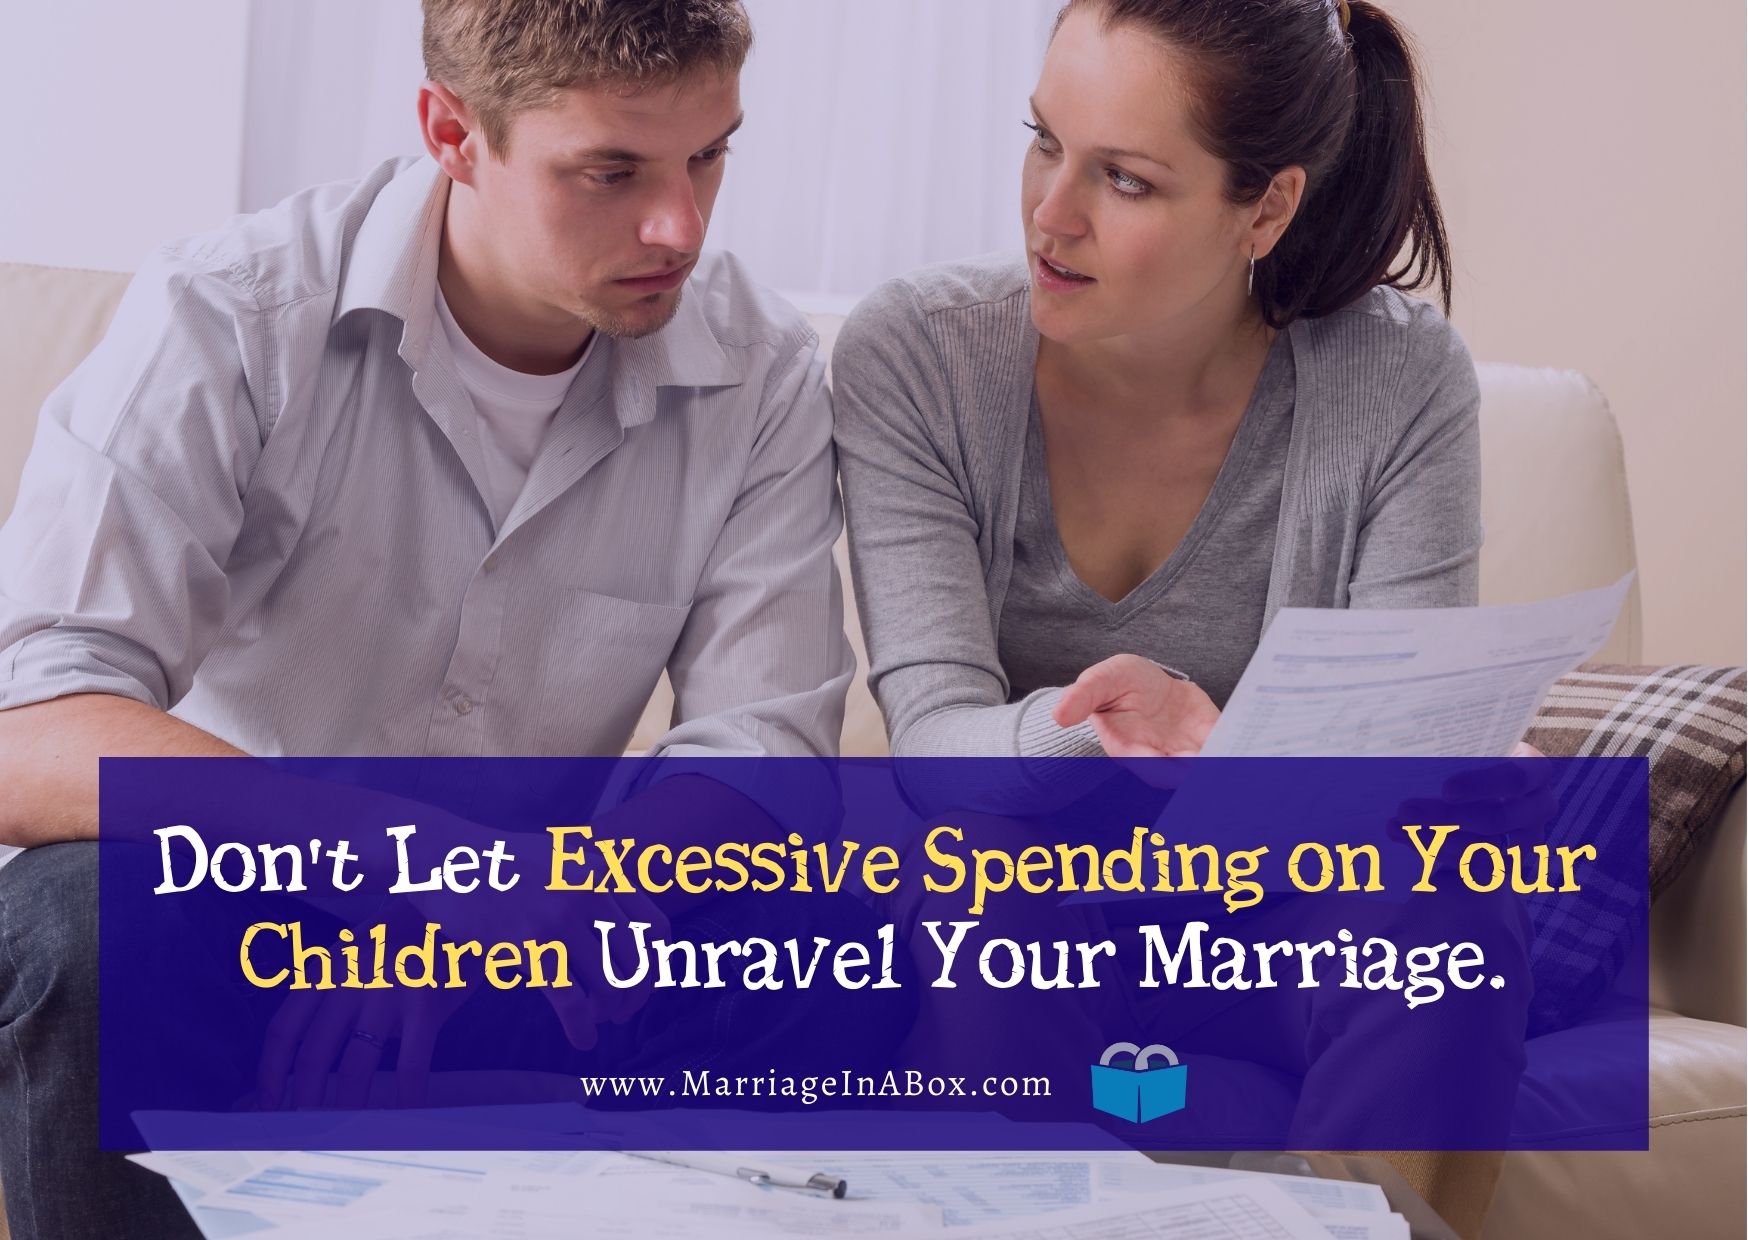 Don’t Let Excessive Spending On Your Children Unravel Your Marriage